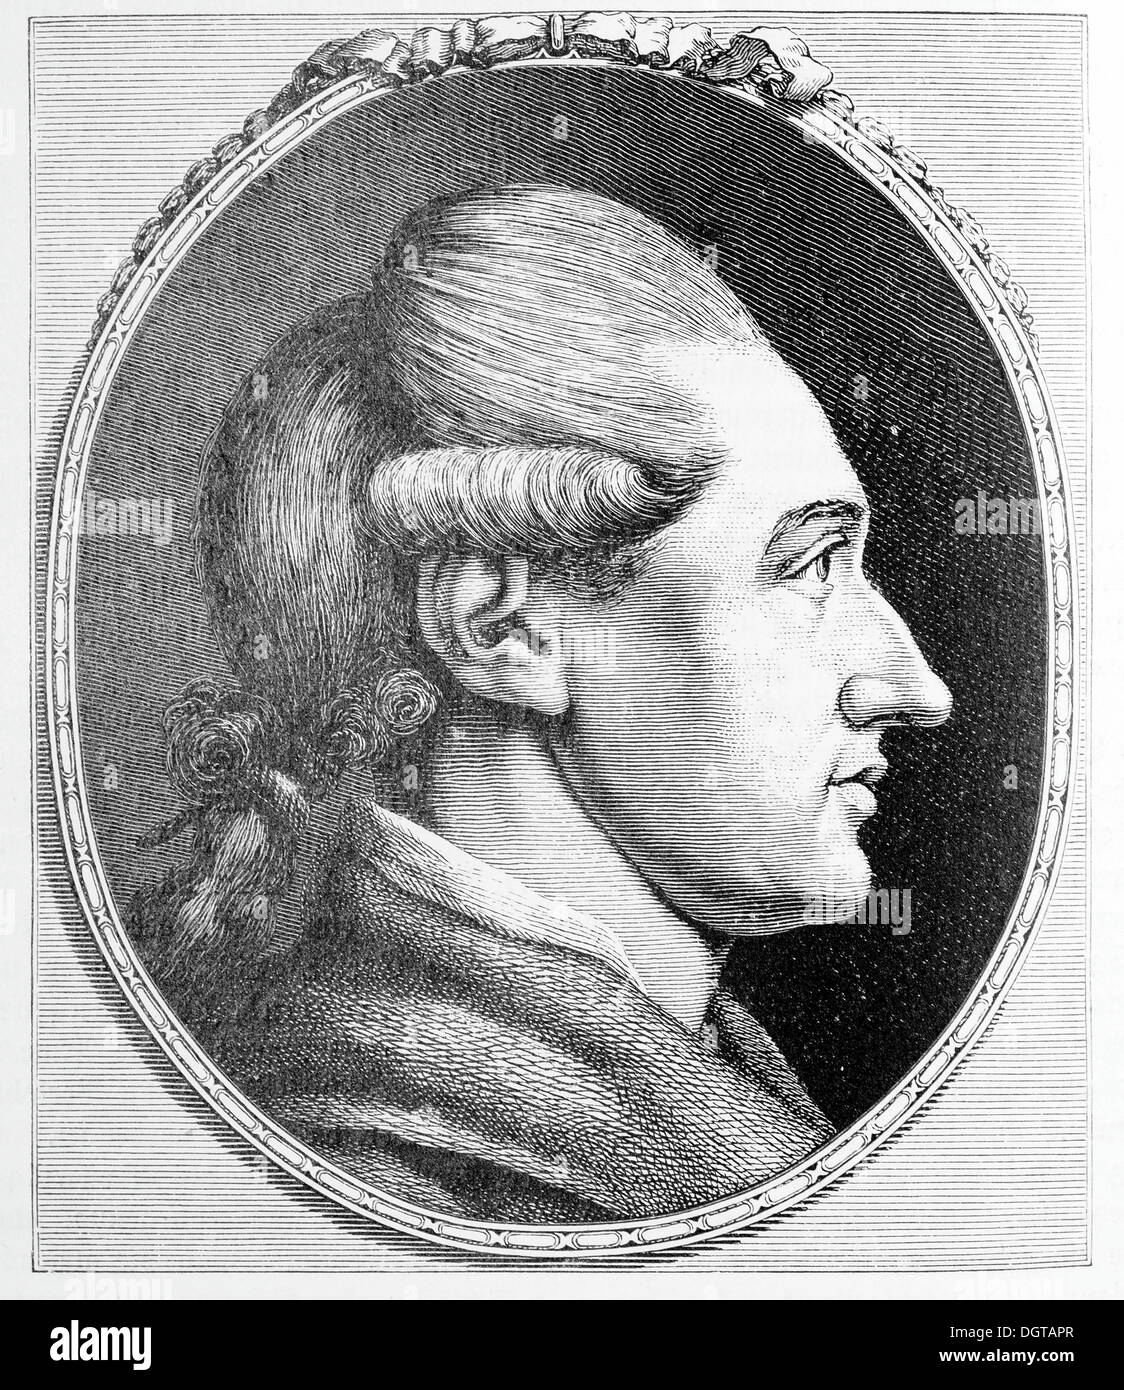 Goethe at the age of 28 years, historic illustration from Deutsche Literaturgeschichte, a history of German literature from 1885 Stock Photo